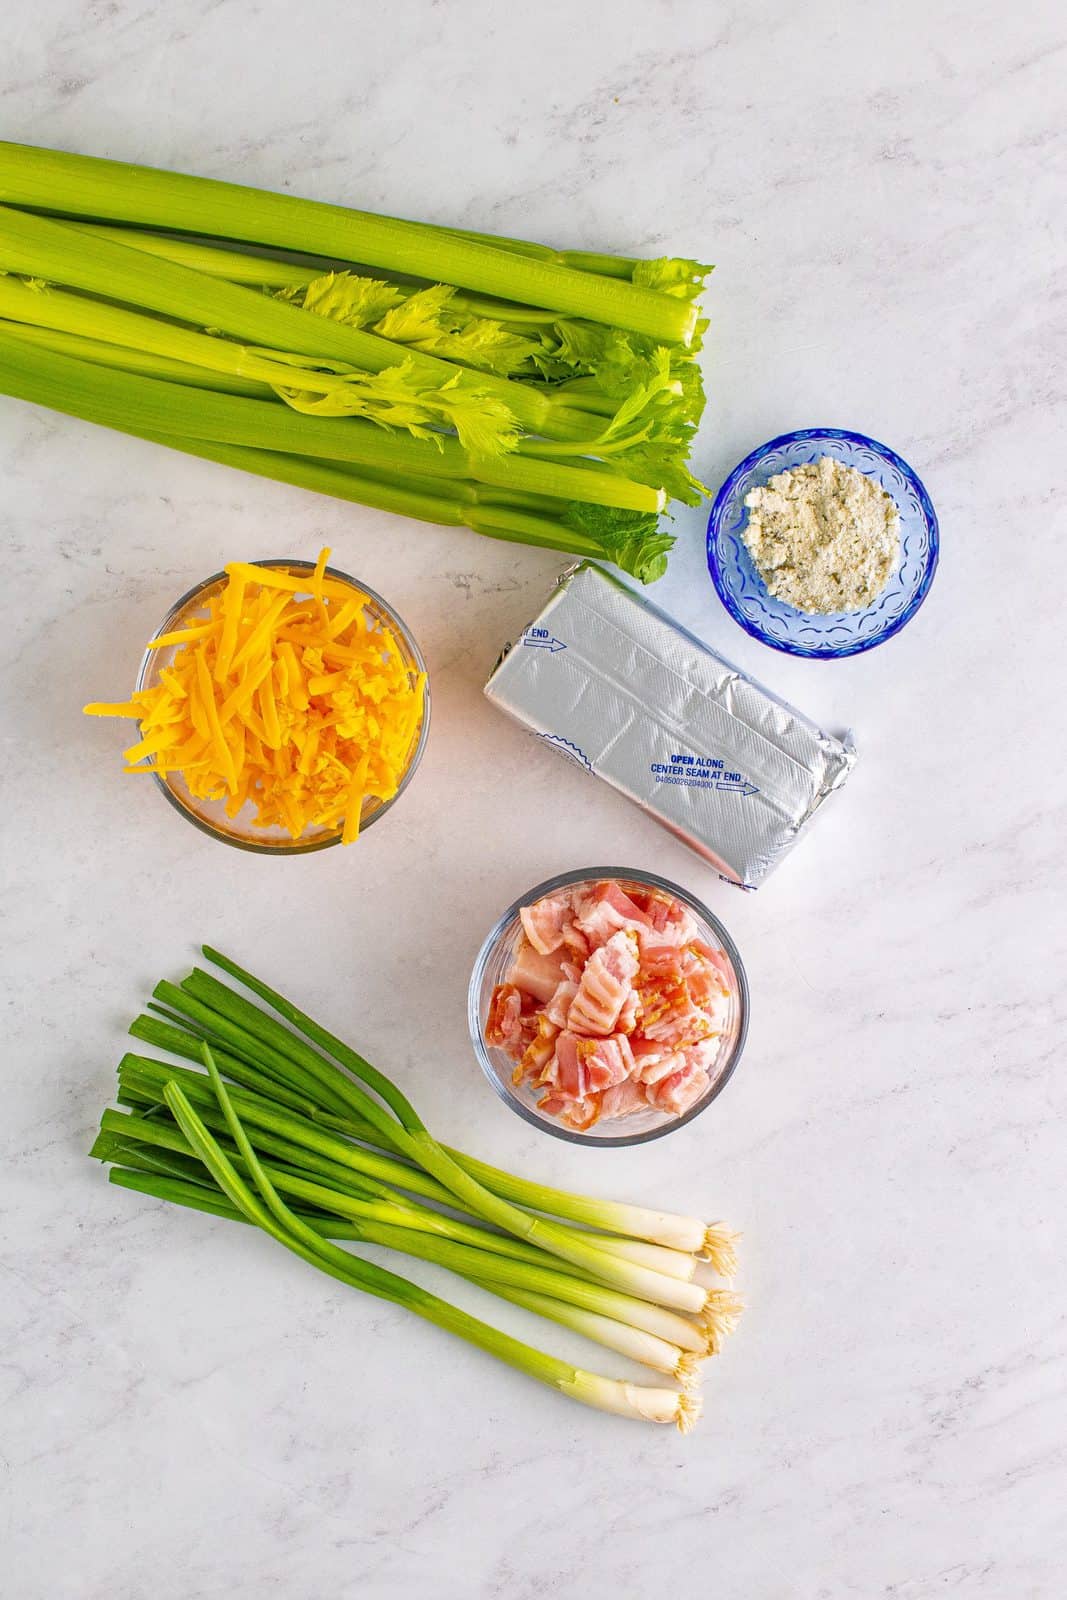 Ingredients needed: bacon, celery, cream cheese, sharp cheddar cheese, dried ranch seasoning and scallions.